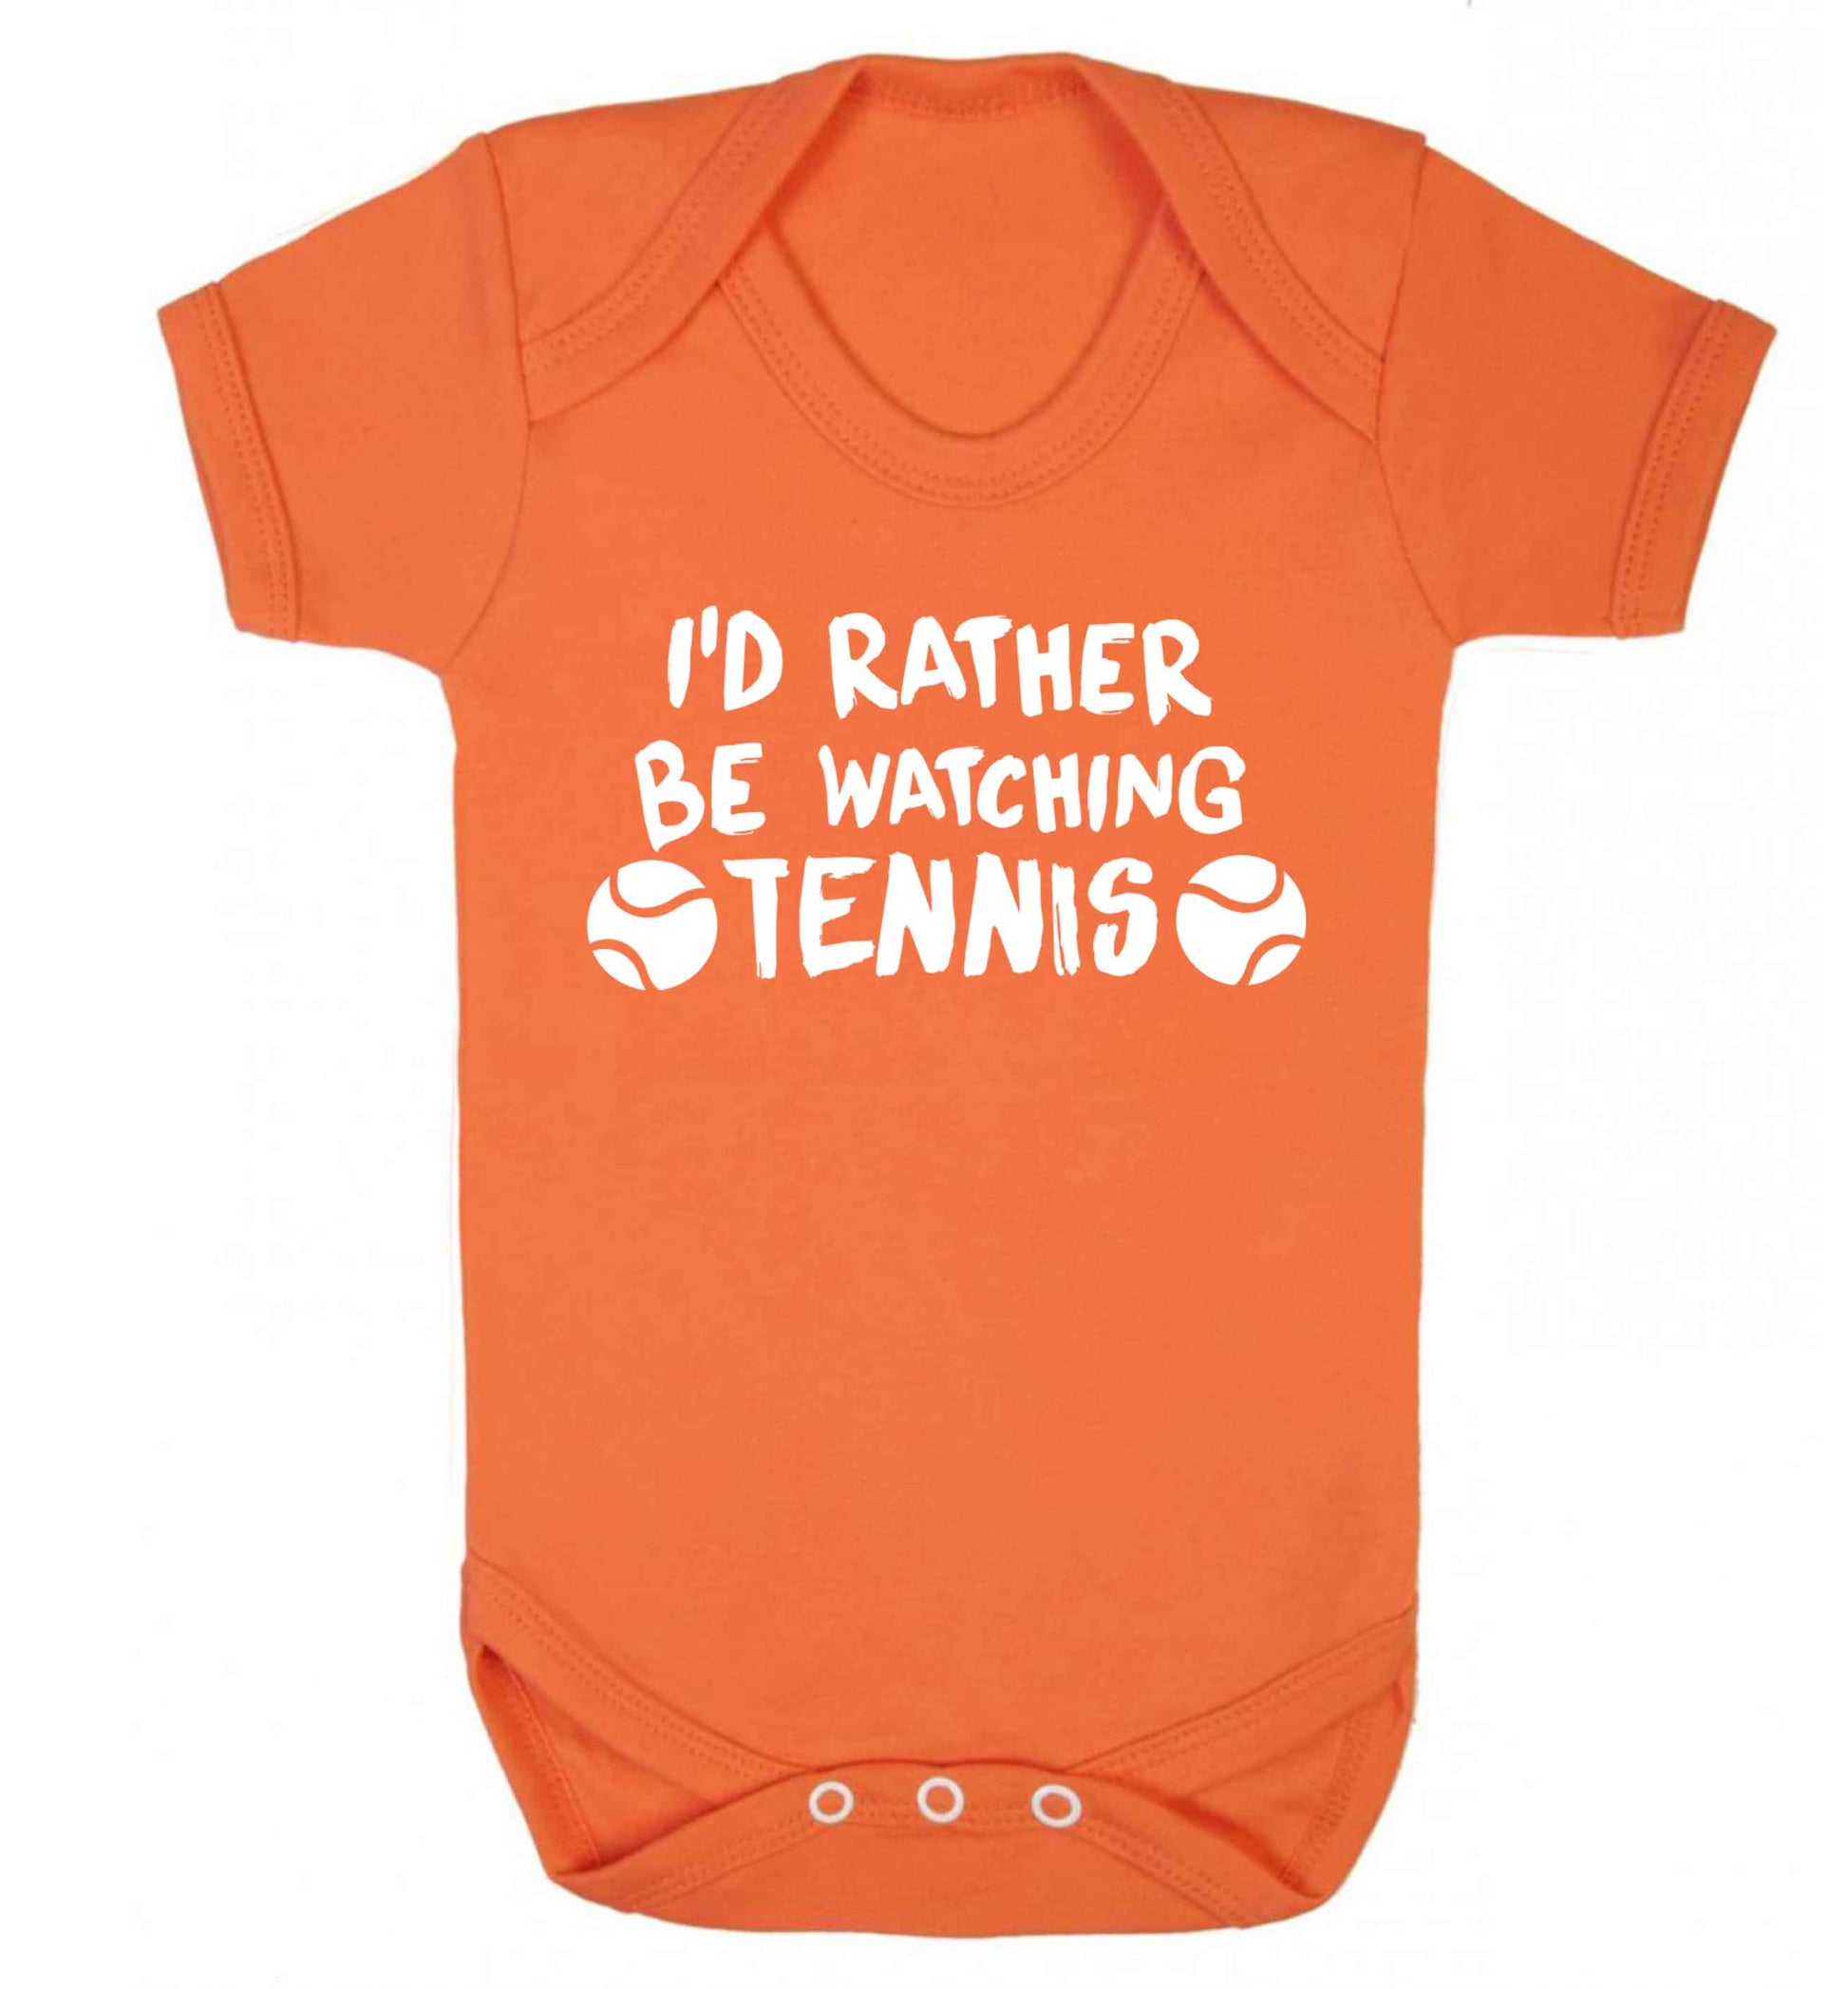 I'd rather be watching the tennis Baby Vest orange 18-24 months